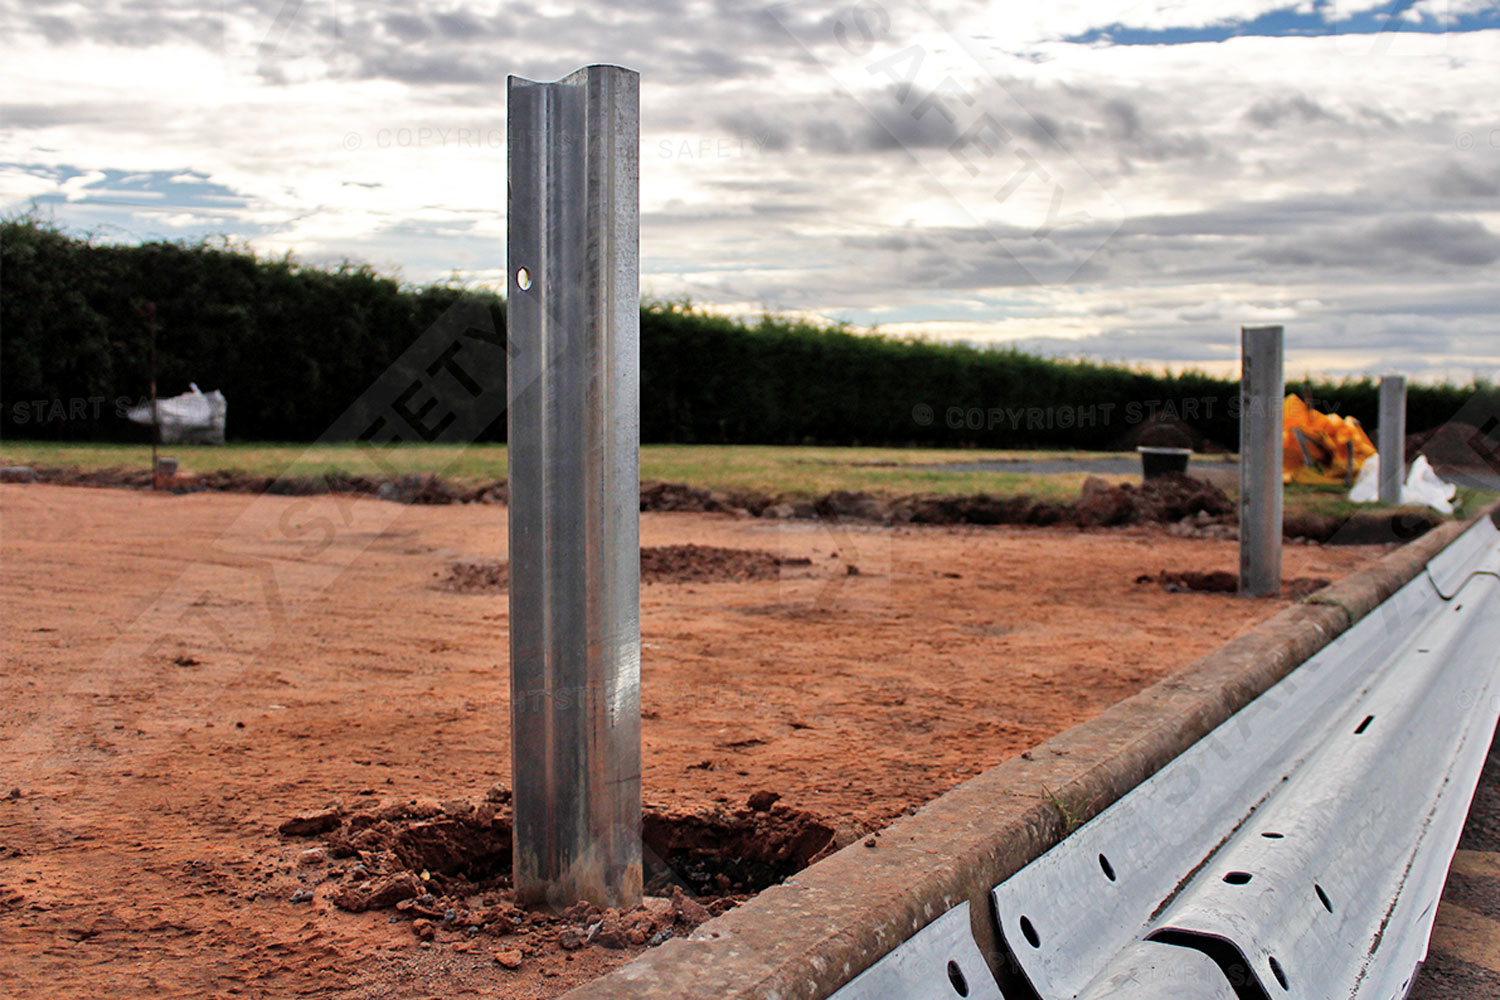 Armco barrier z-section post being installed